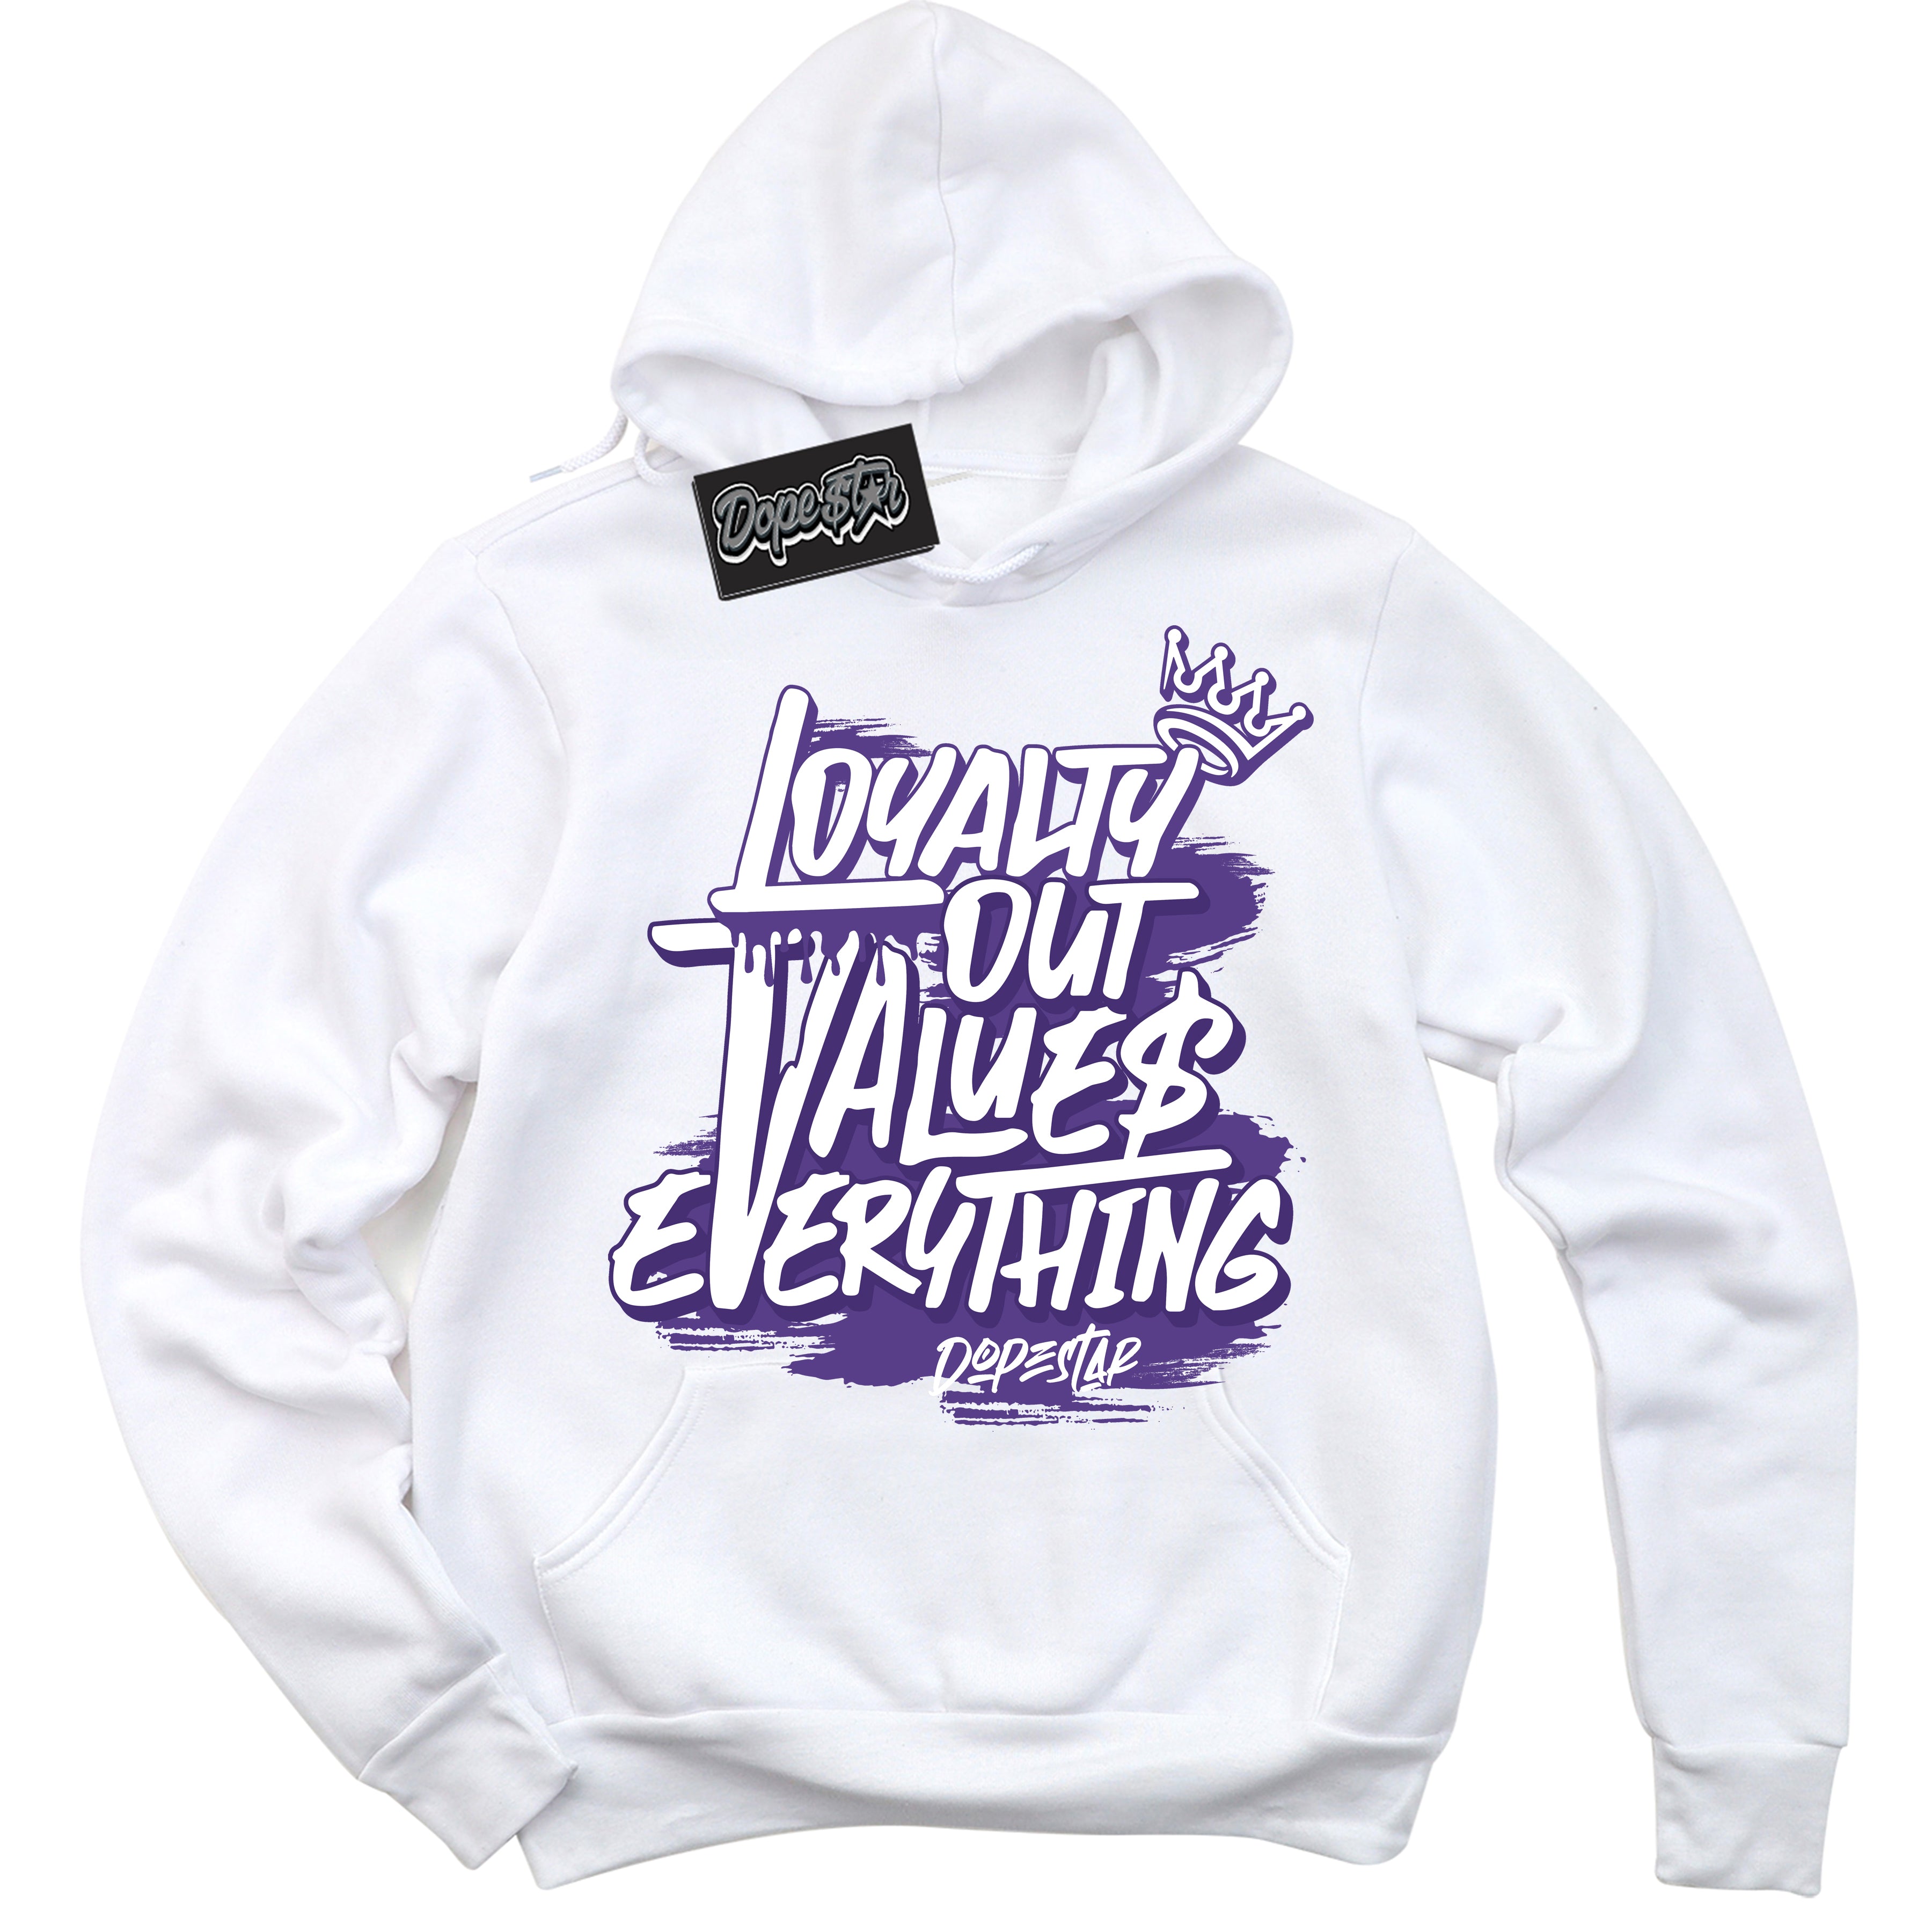 Cool White Hoodie with “ Loyalty Out Values Everything ”  design that Perfectly Matches Protro Court Purple 8s Sneakers.